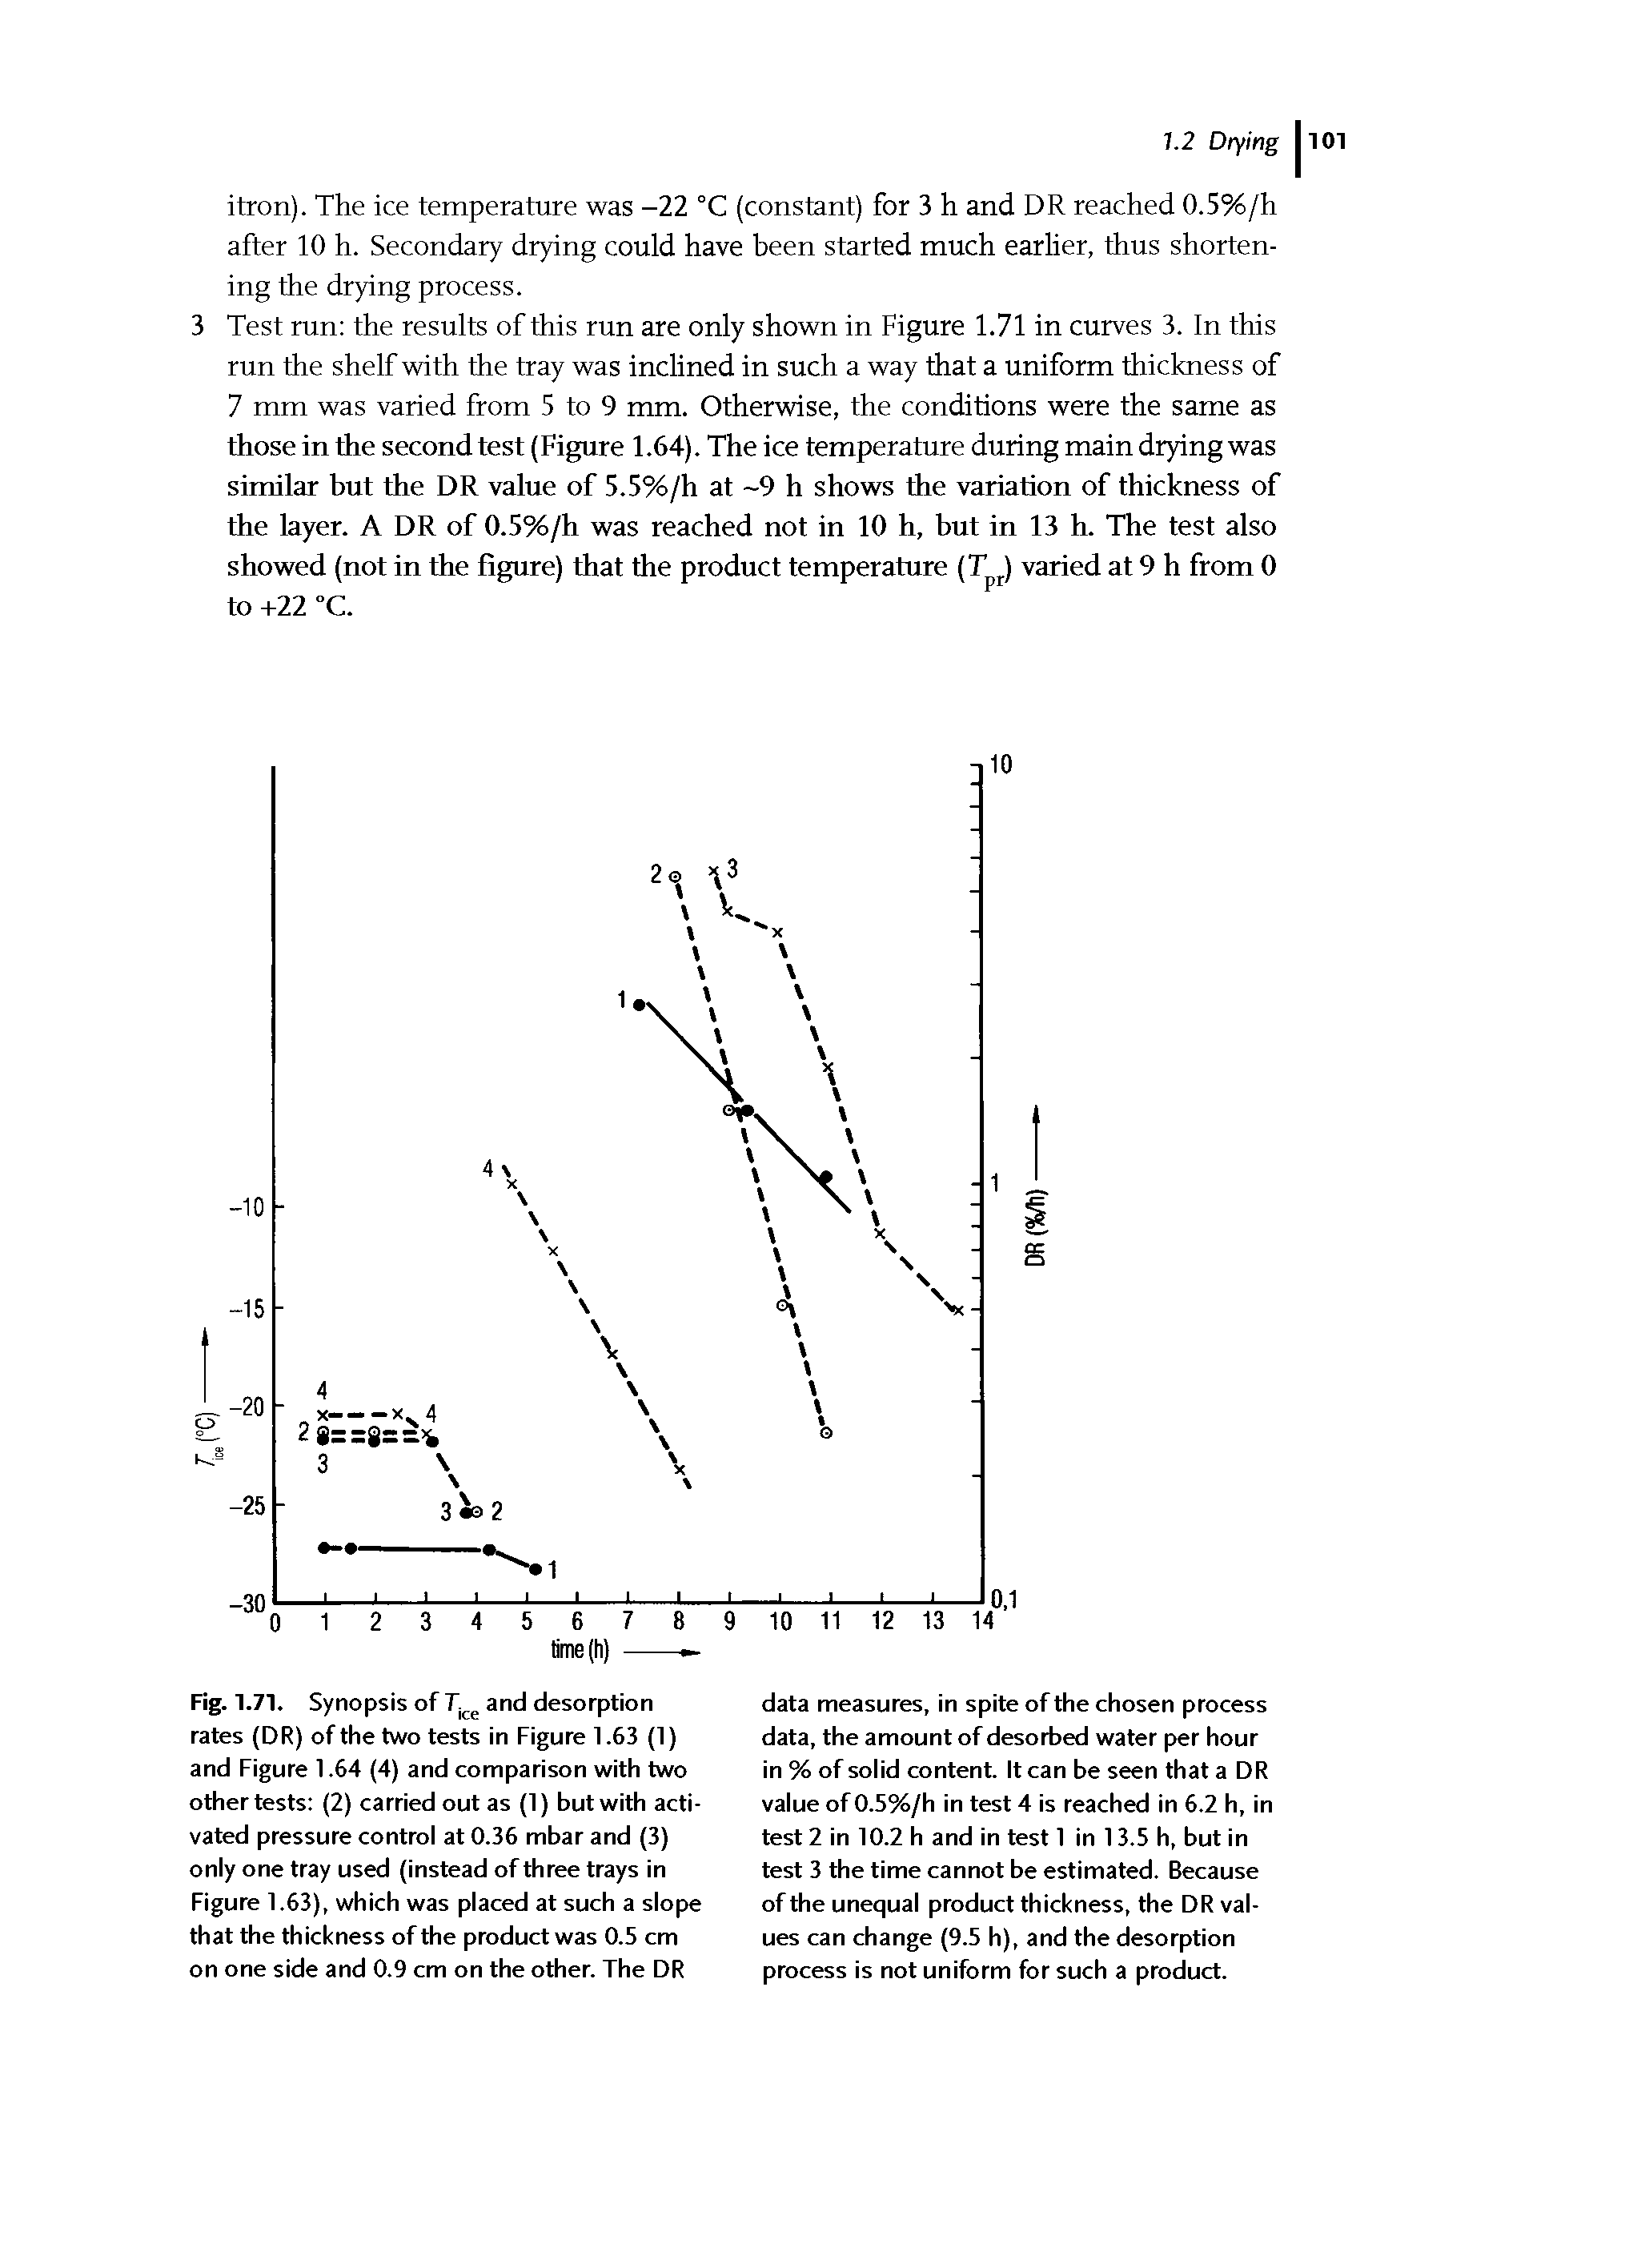 Fig. 1.71. Synopsis of 7"ice and desorption rates (DR) of the two tests in Figure 1.63 (1) and Figure 1.64 (4) and comparison with two other tests (2) carried out as (1) but with activated pressure control at 0.36 mbar and (3) only one tray used (instead of three trays in Figure 1.63), which was placed at such a slope that the thickness of the product was 0.5 cm on one side and 0.9 cm on the other. The DR...